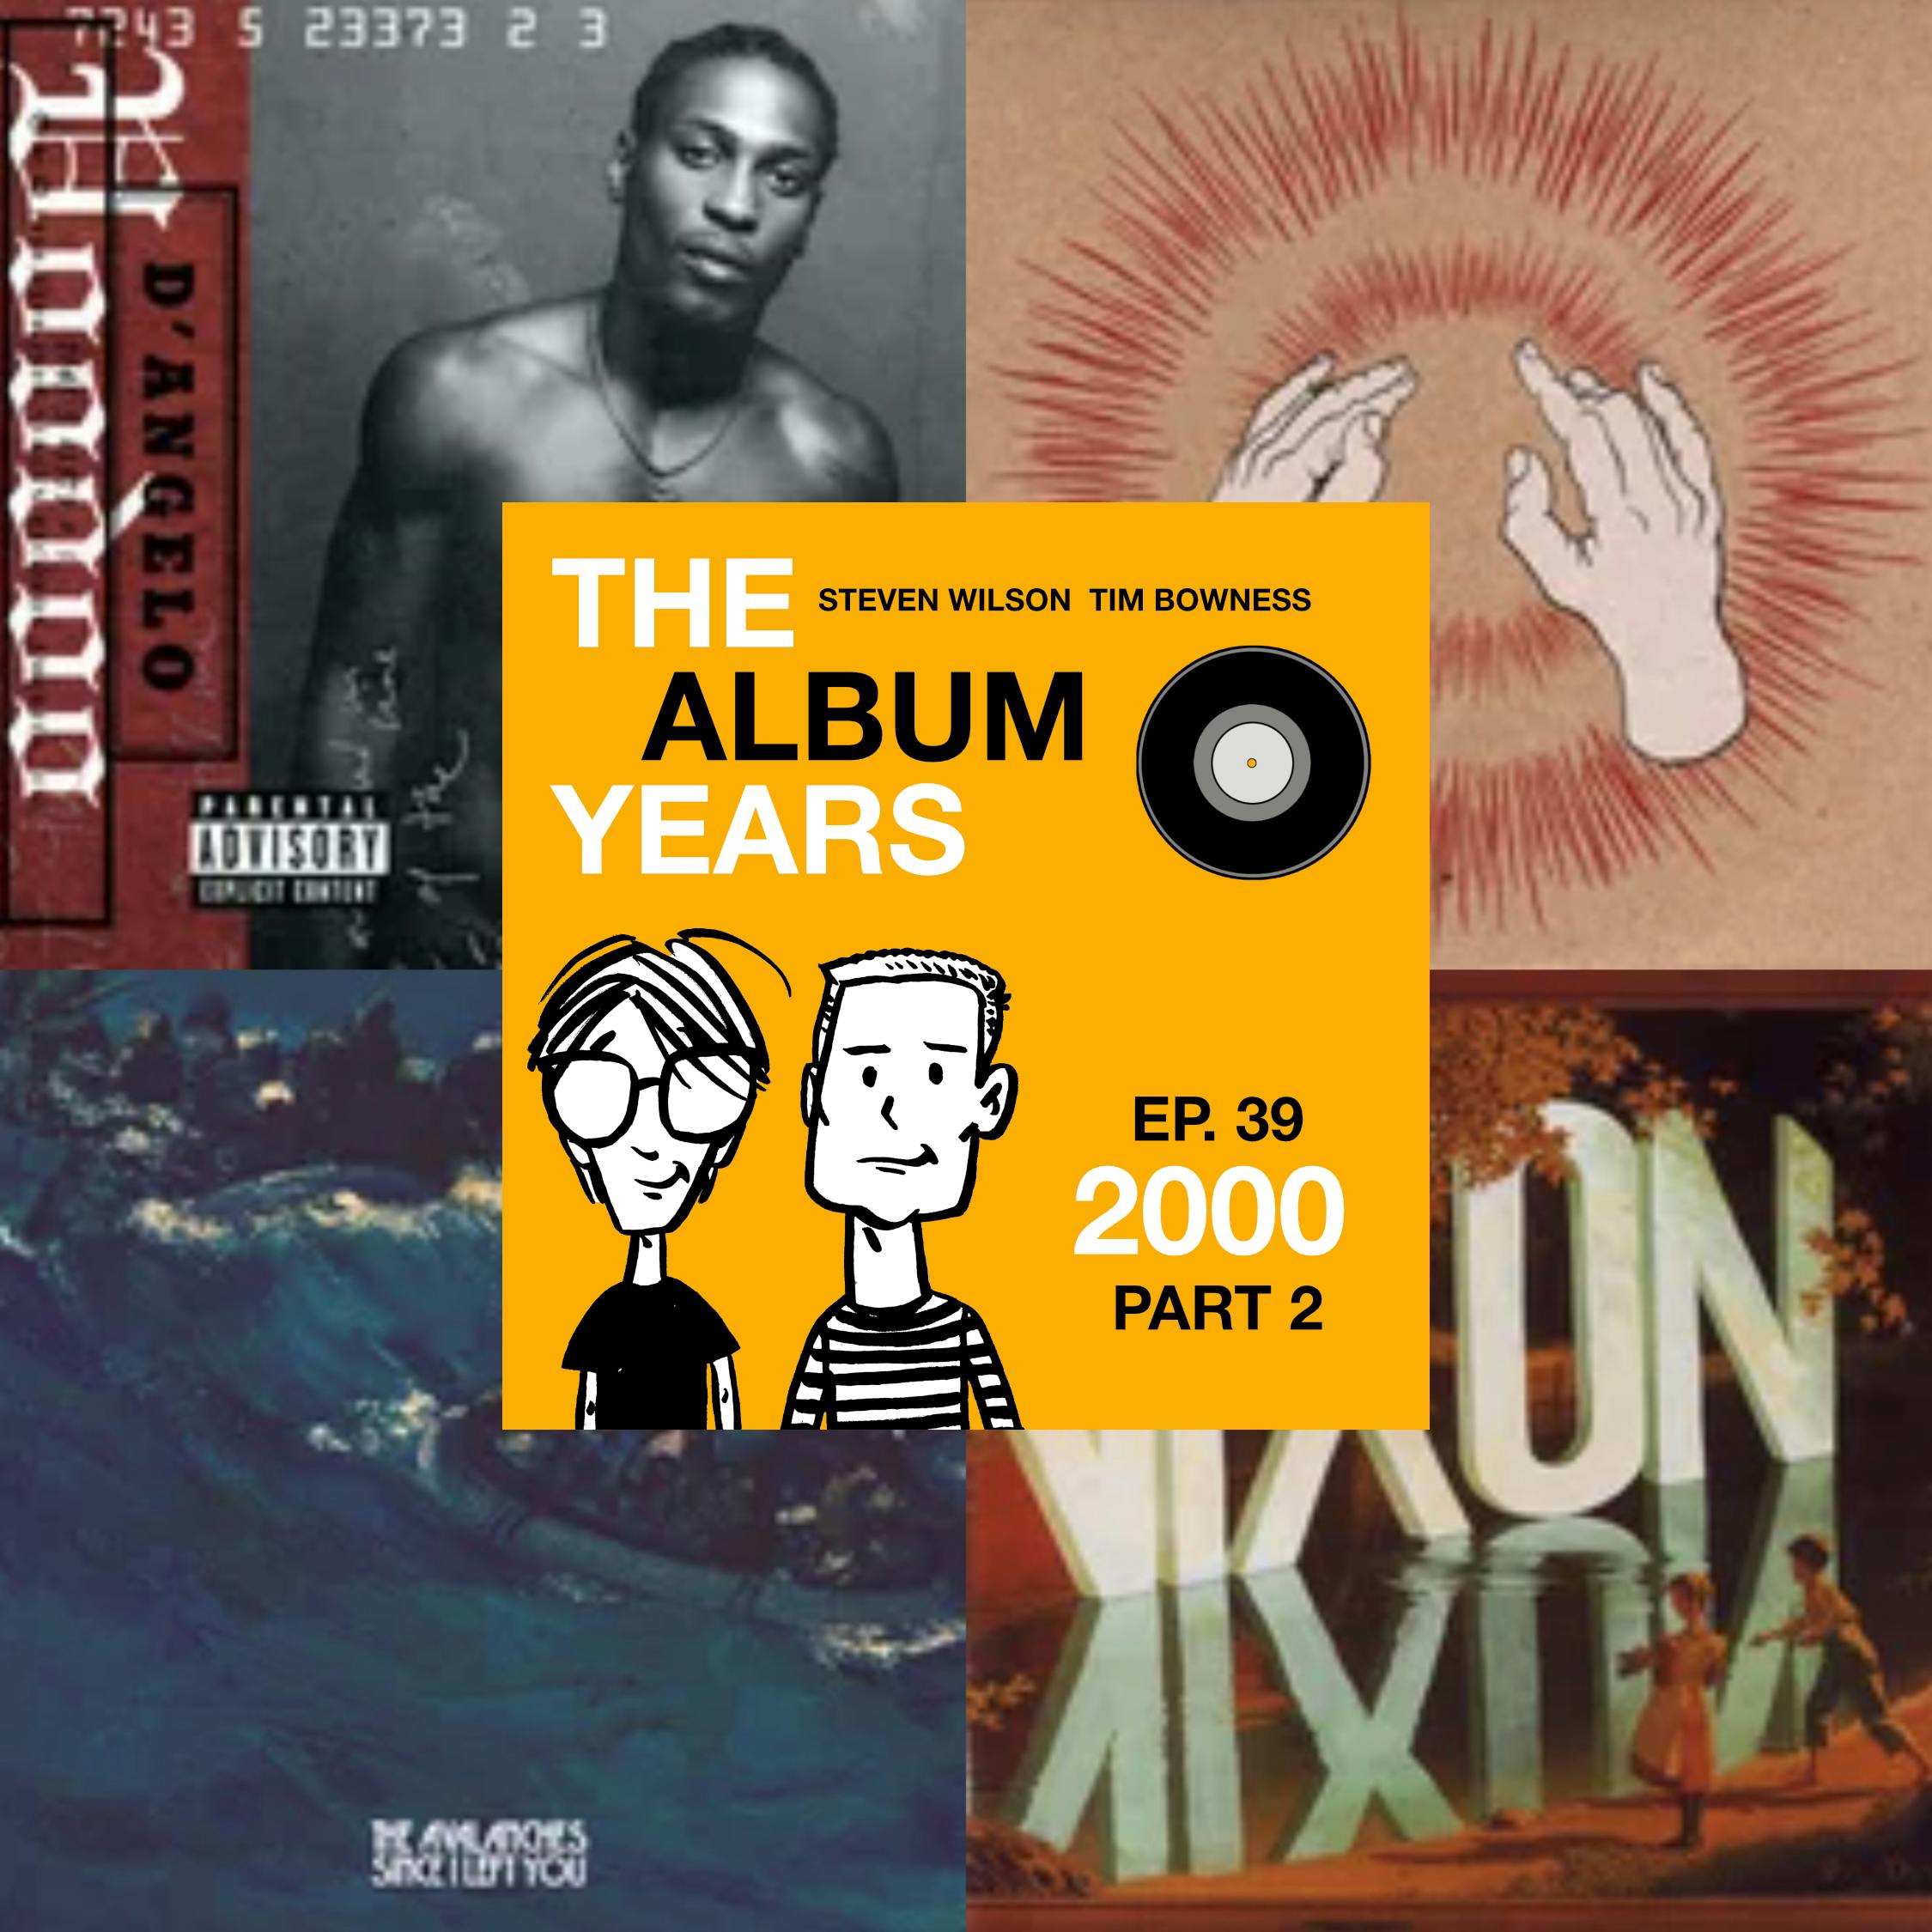 #39 (2000 Part 2) D’Angelo, Godspeed You! Black Emperor, The Avalanches & more